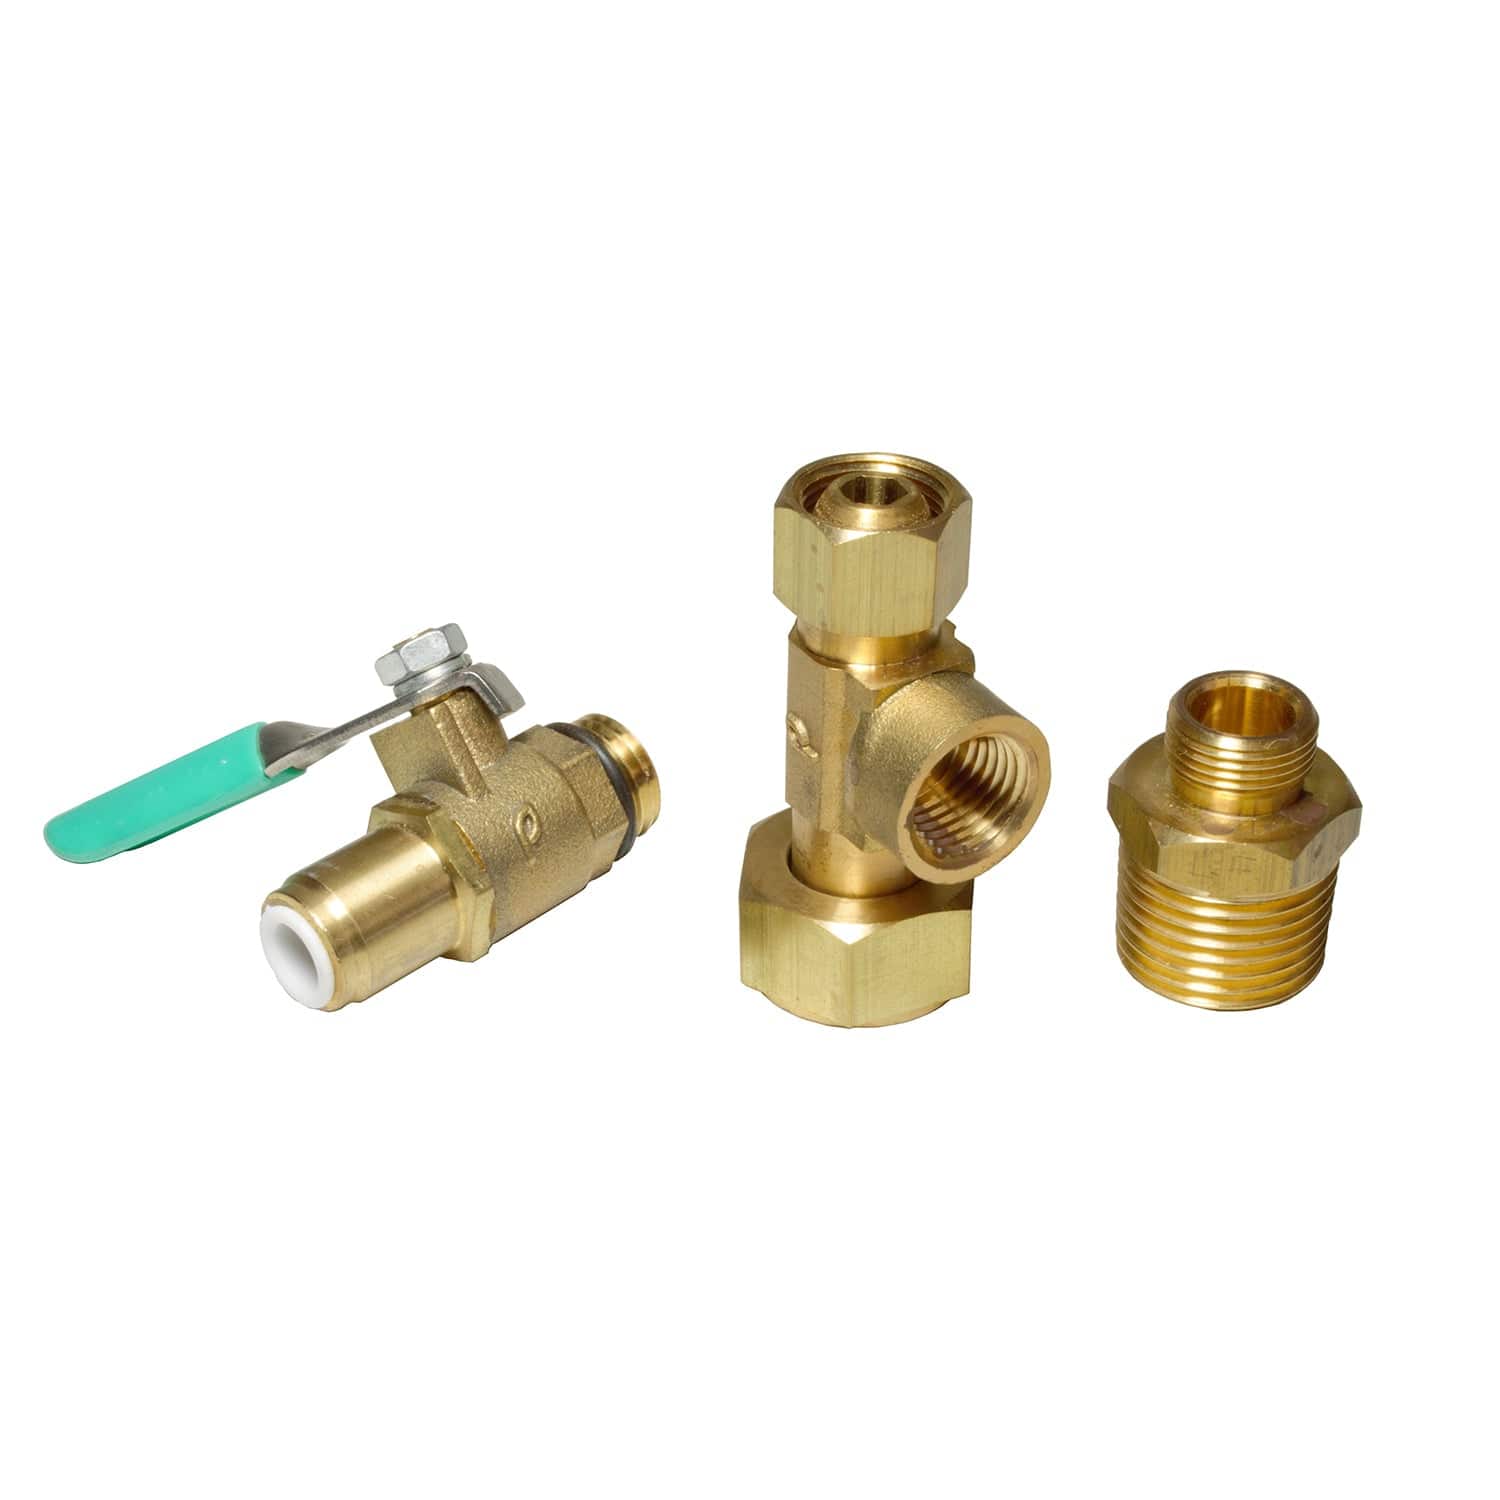 Heavy Duty EZ RO Reverse Osmosis Filtration Ice Maker Refrigerator Universal Feed Water Supply Adapter With 1/4" Quick Connect Ball Valve Solid Brass